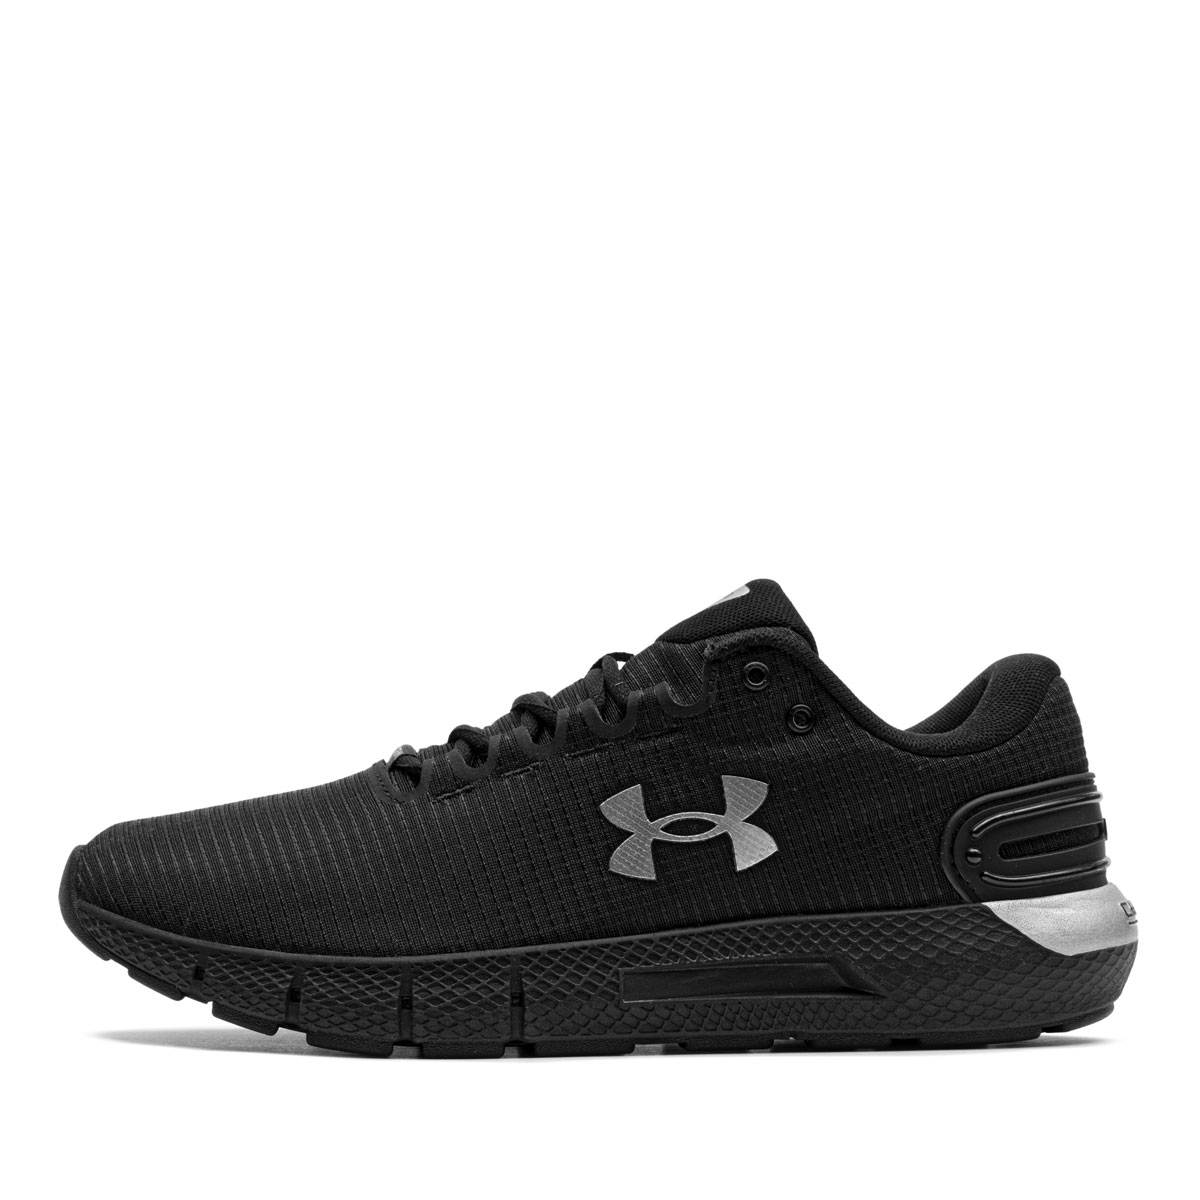 Under Armour Charged Rogue 2.5 Storm  3025250-001